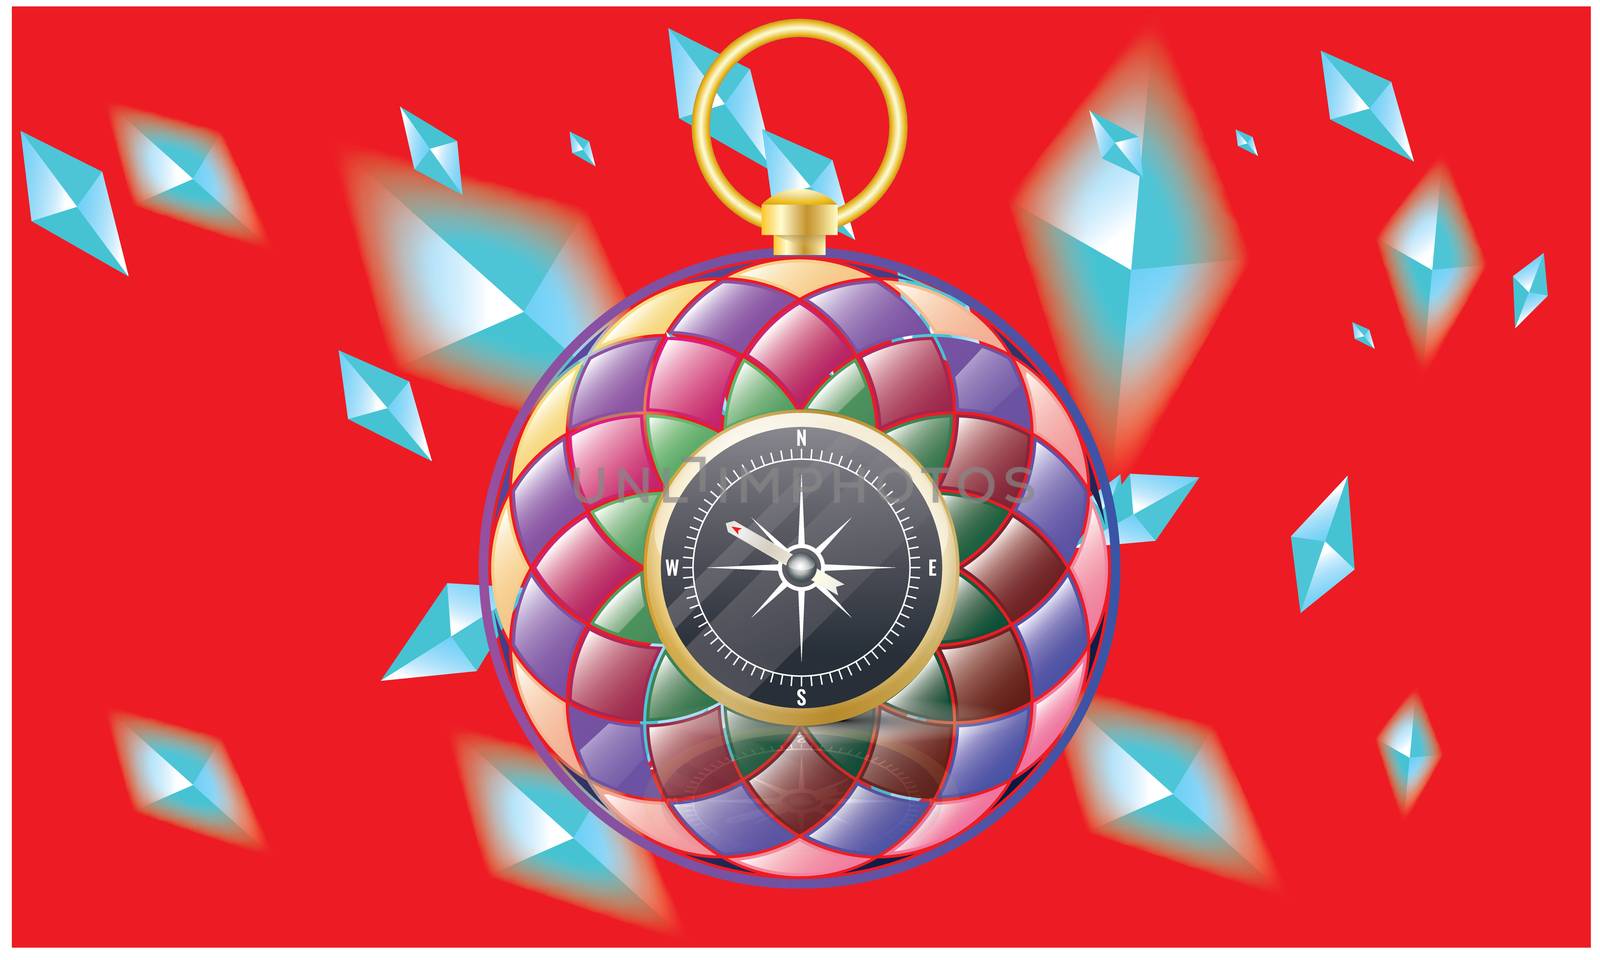 compass in rainbow color on diamonds red background